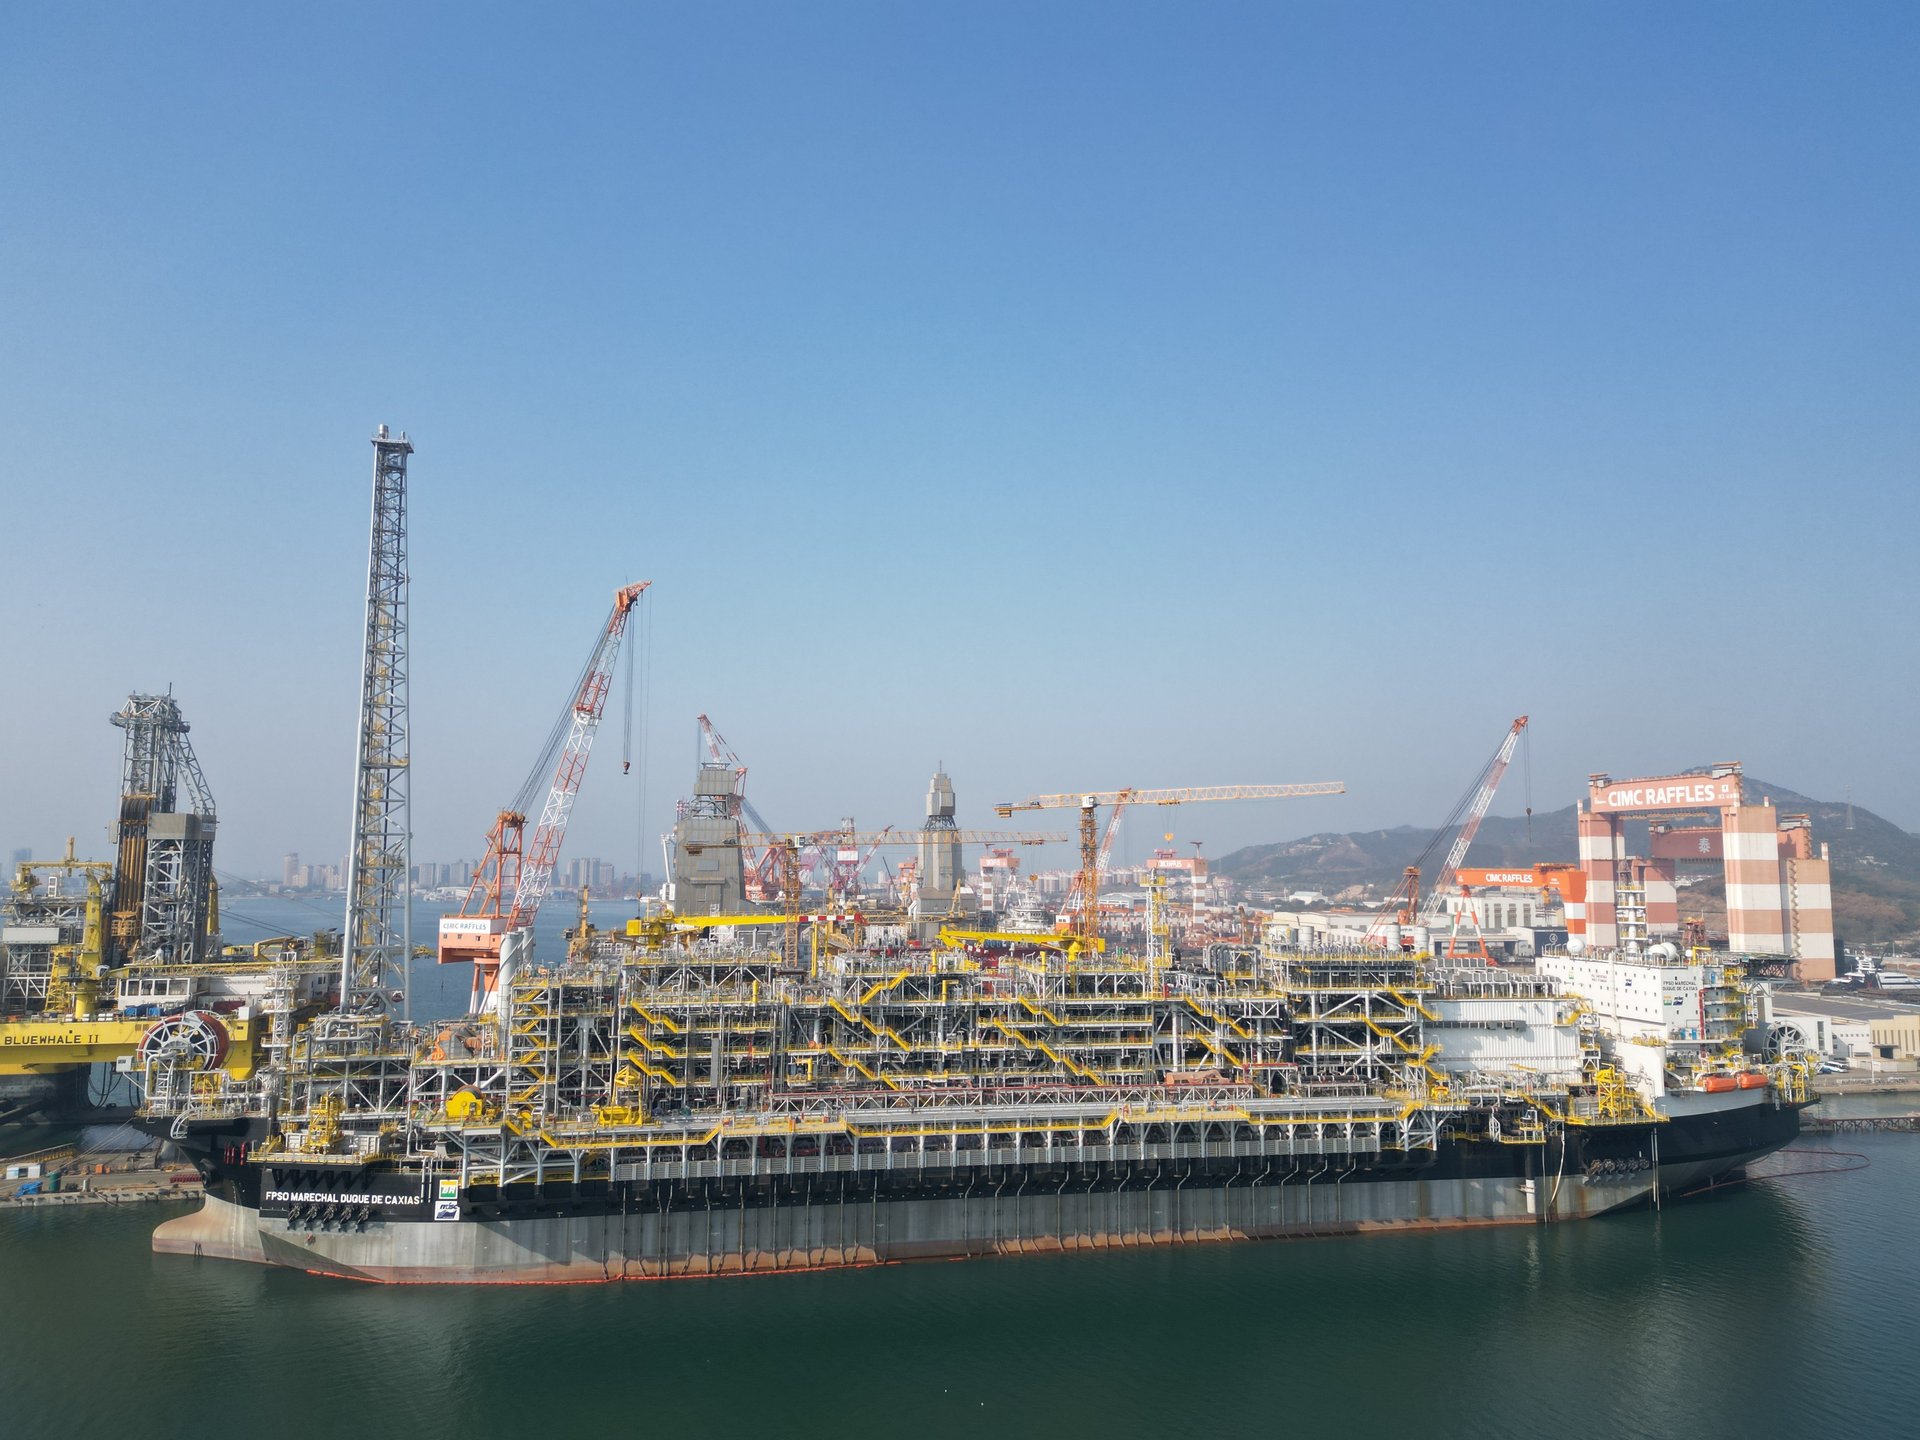 Petrobras seals agreement for development and implementation of cutting-edge HISEP® project in the Mero field